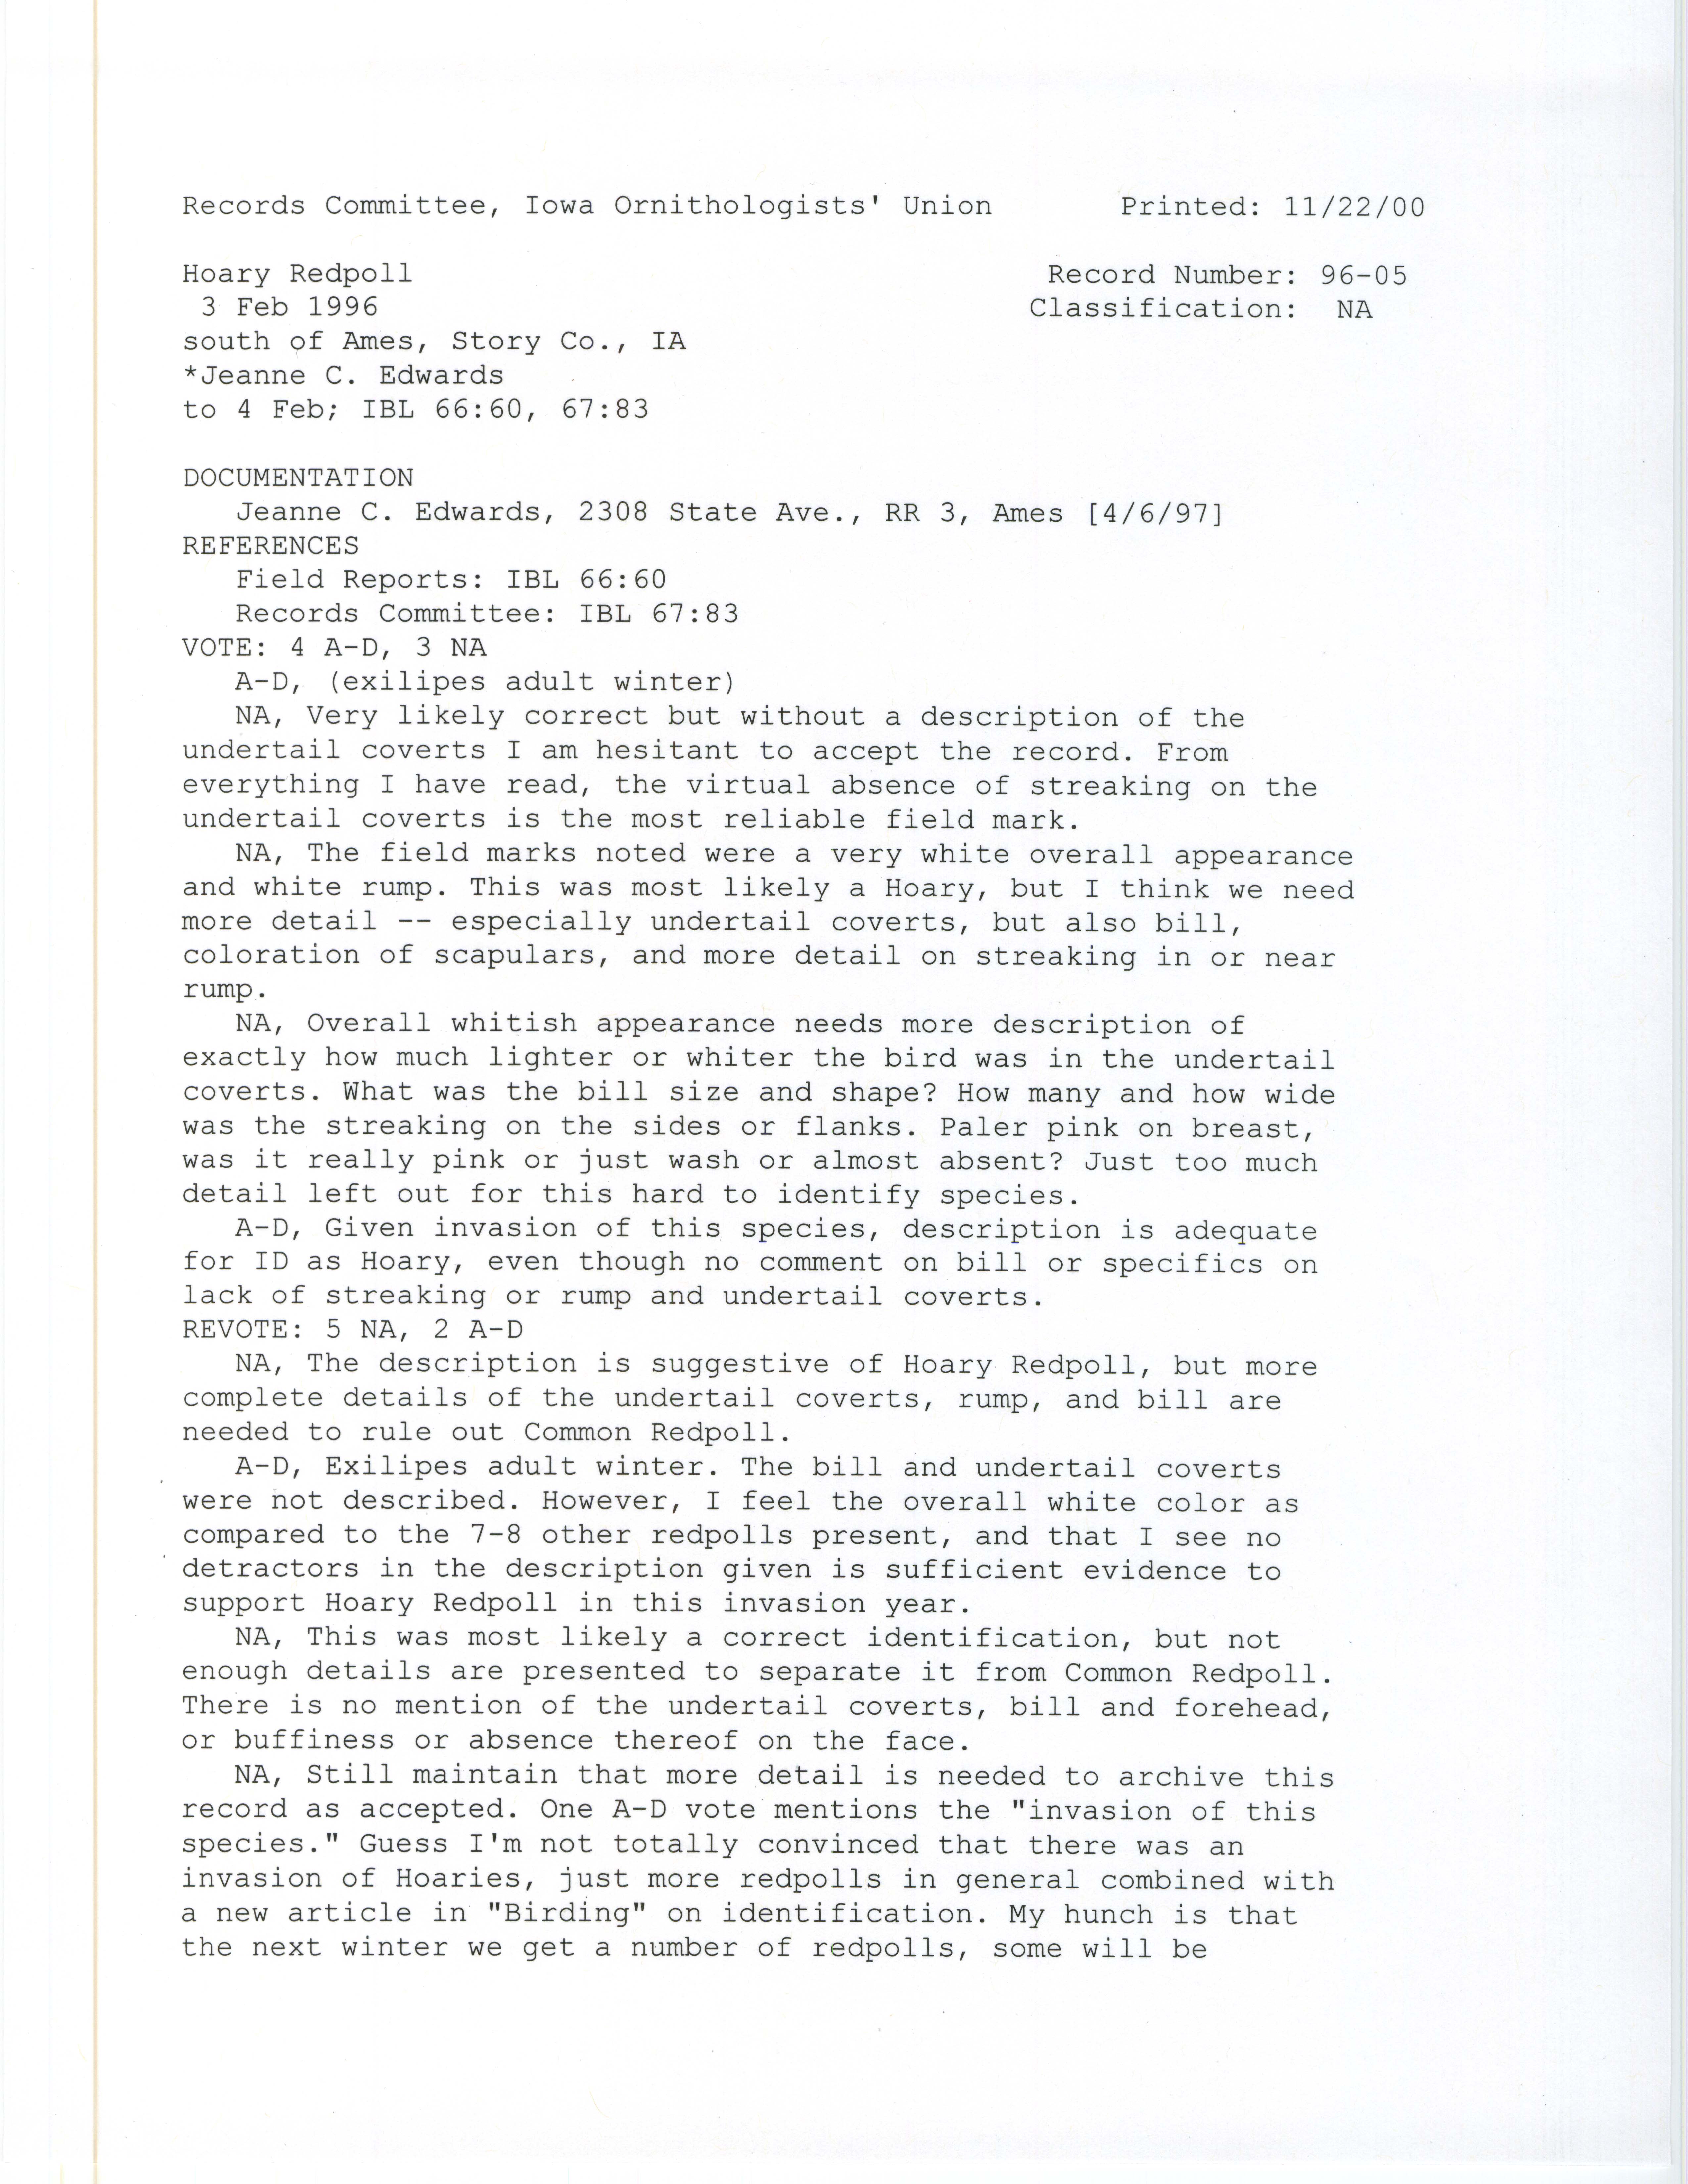 Records Committee review for rare bird sighting for Hoary Redpoll at Ames, 1996